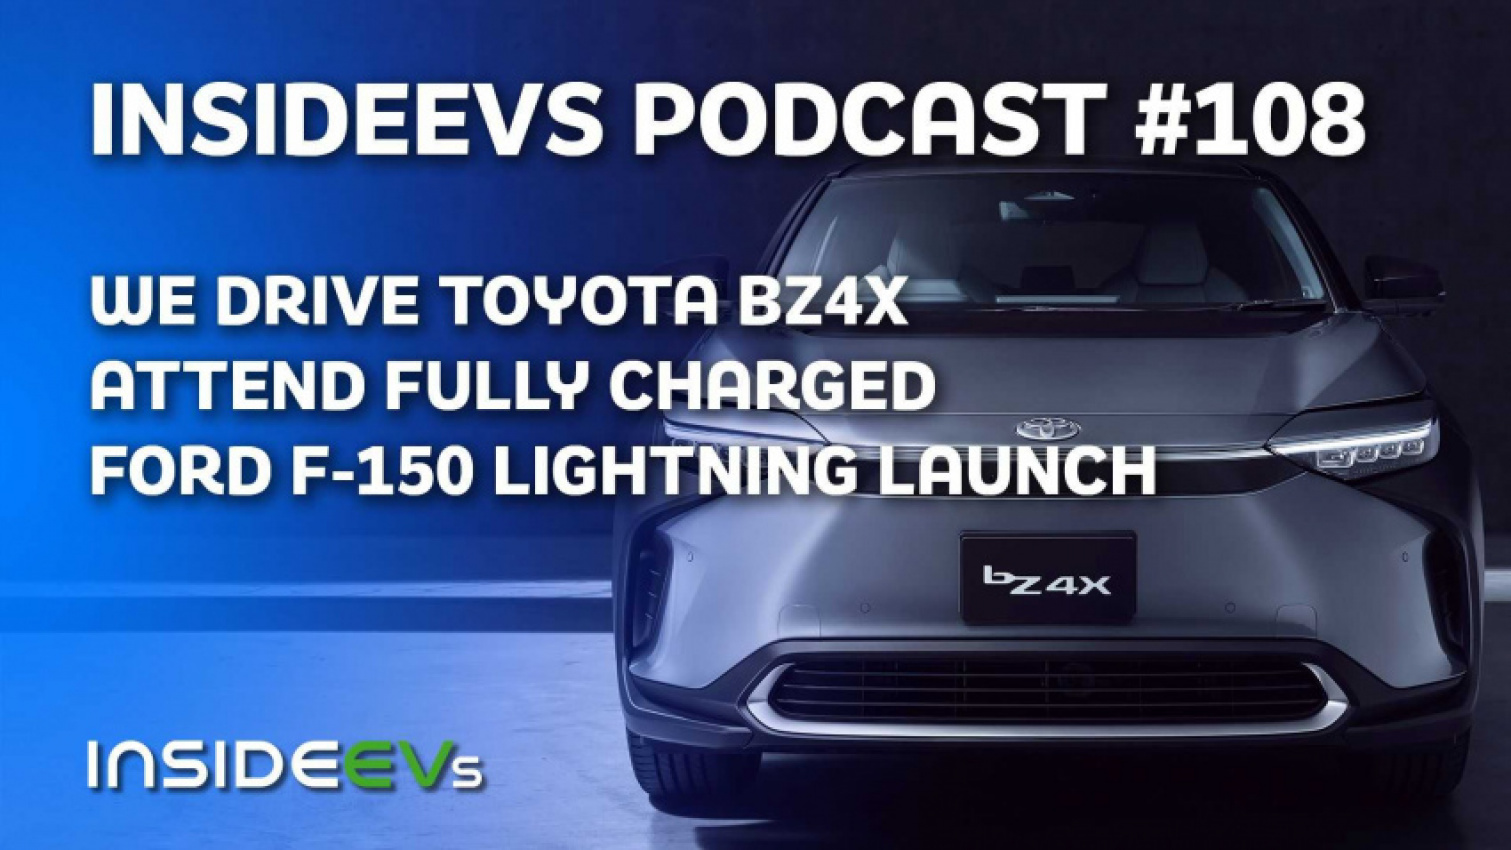 autos, cars, evs, ford, toyota, vnex, we drive toyota bz4x, attend ford-f-150 lightning launch